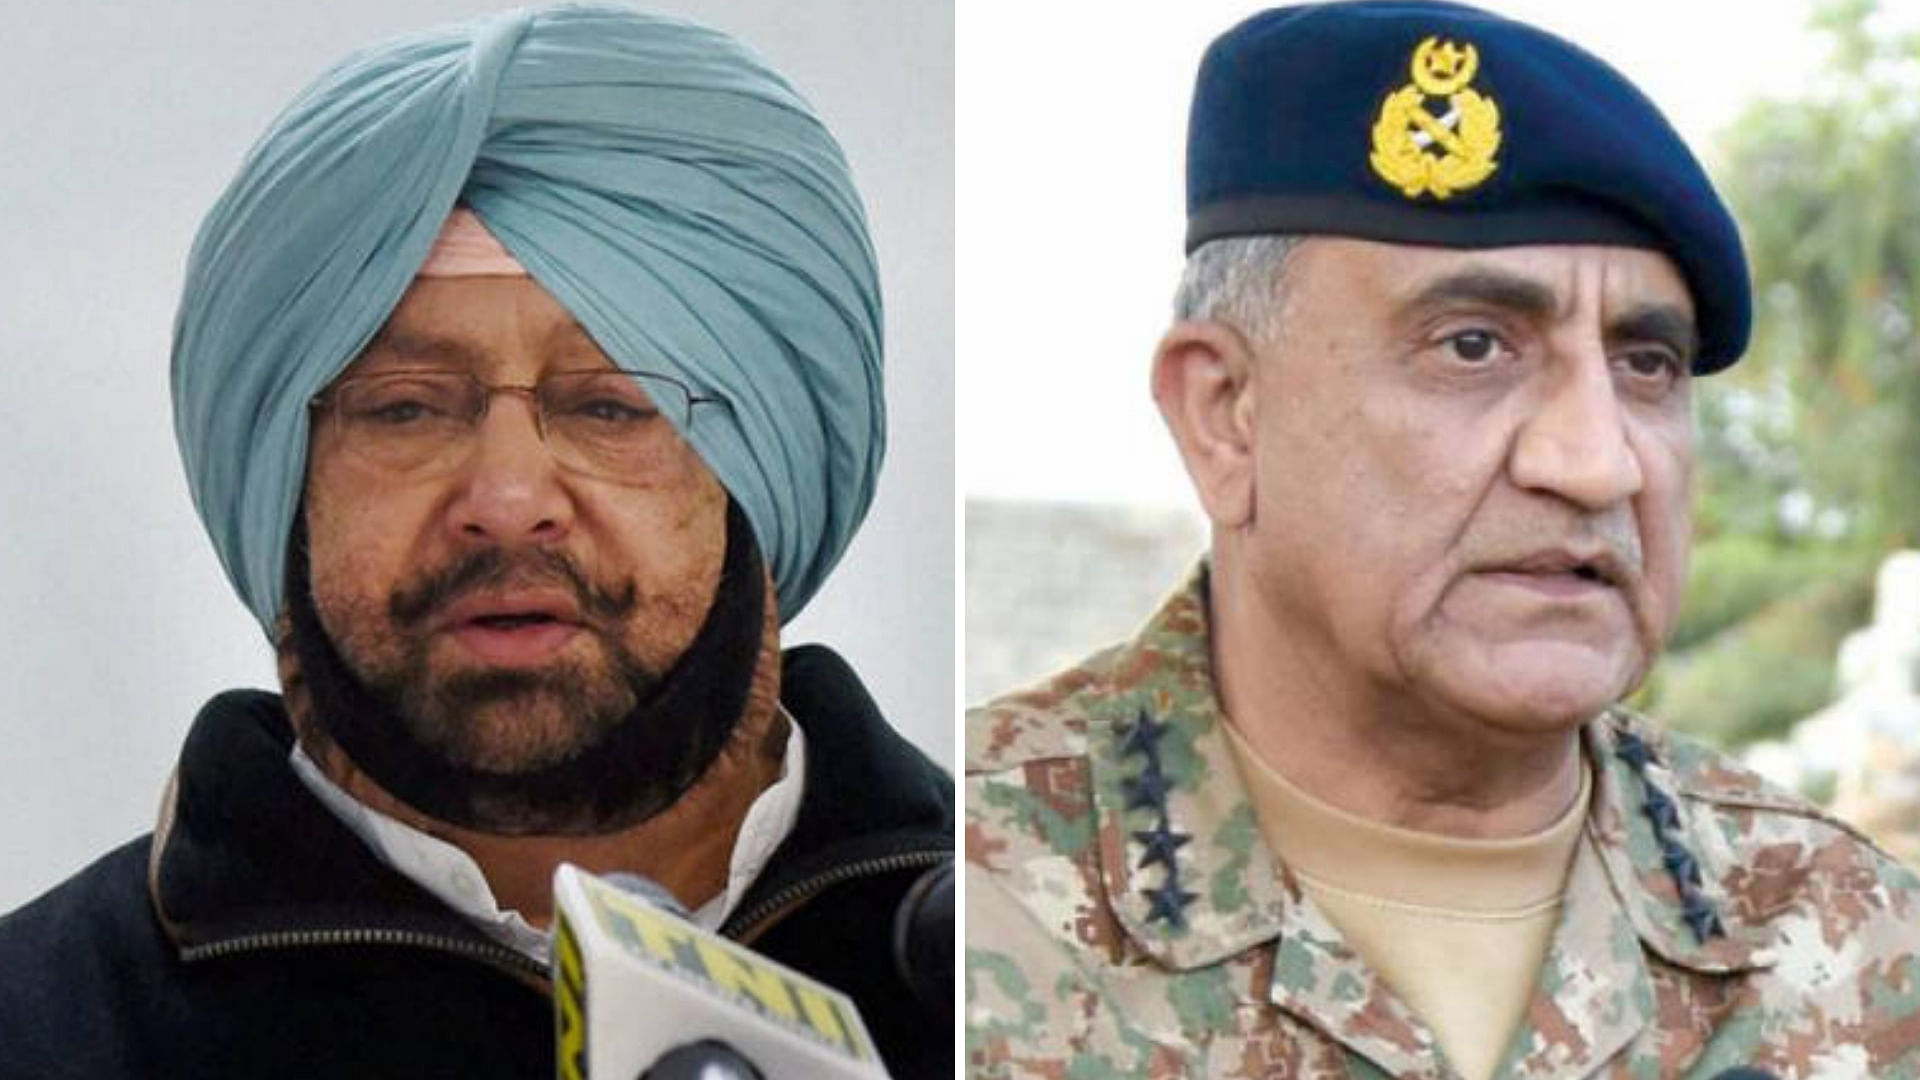 Punjab Chief Minister Captain Amarinder Singh warned Pakistan Army chief Qamar Javed Bajwa against disturbing the peaceful atmosphere of Punjab and the country.